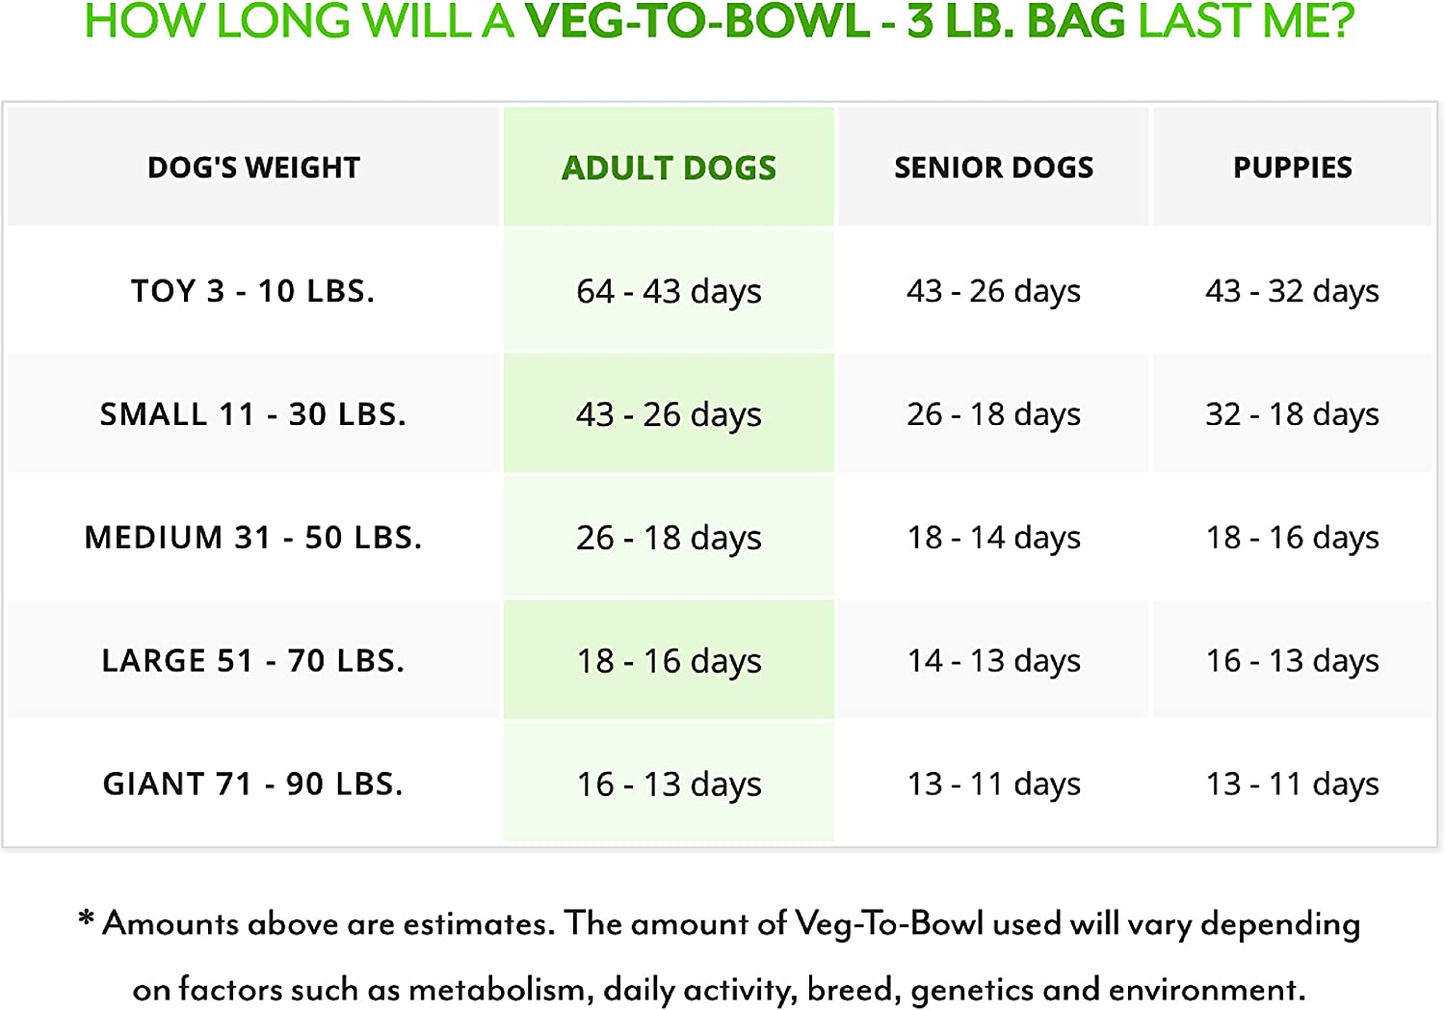 Veg-To-Bowl Dog Food, Human Grade Dehydrated Base Mix for Dogs, Grain Free Holistic Mix